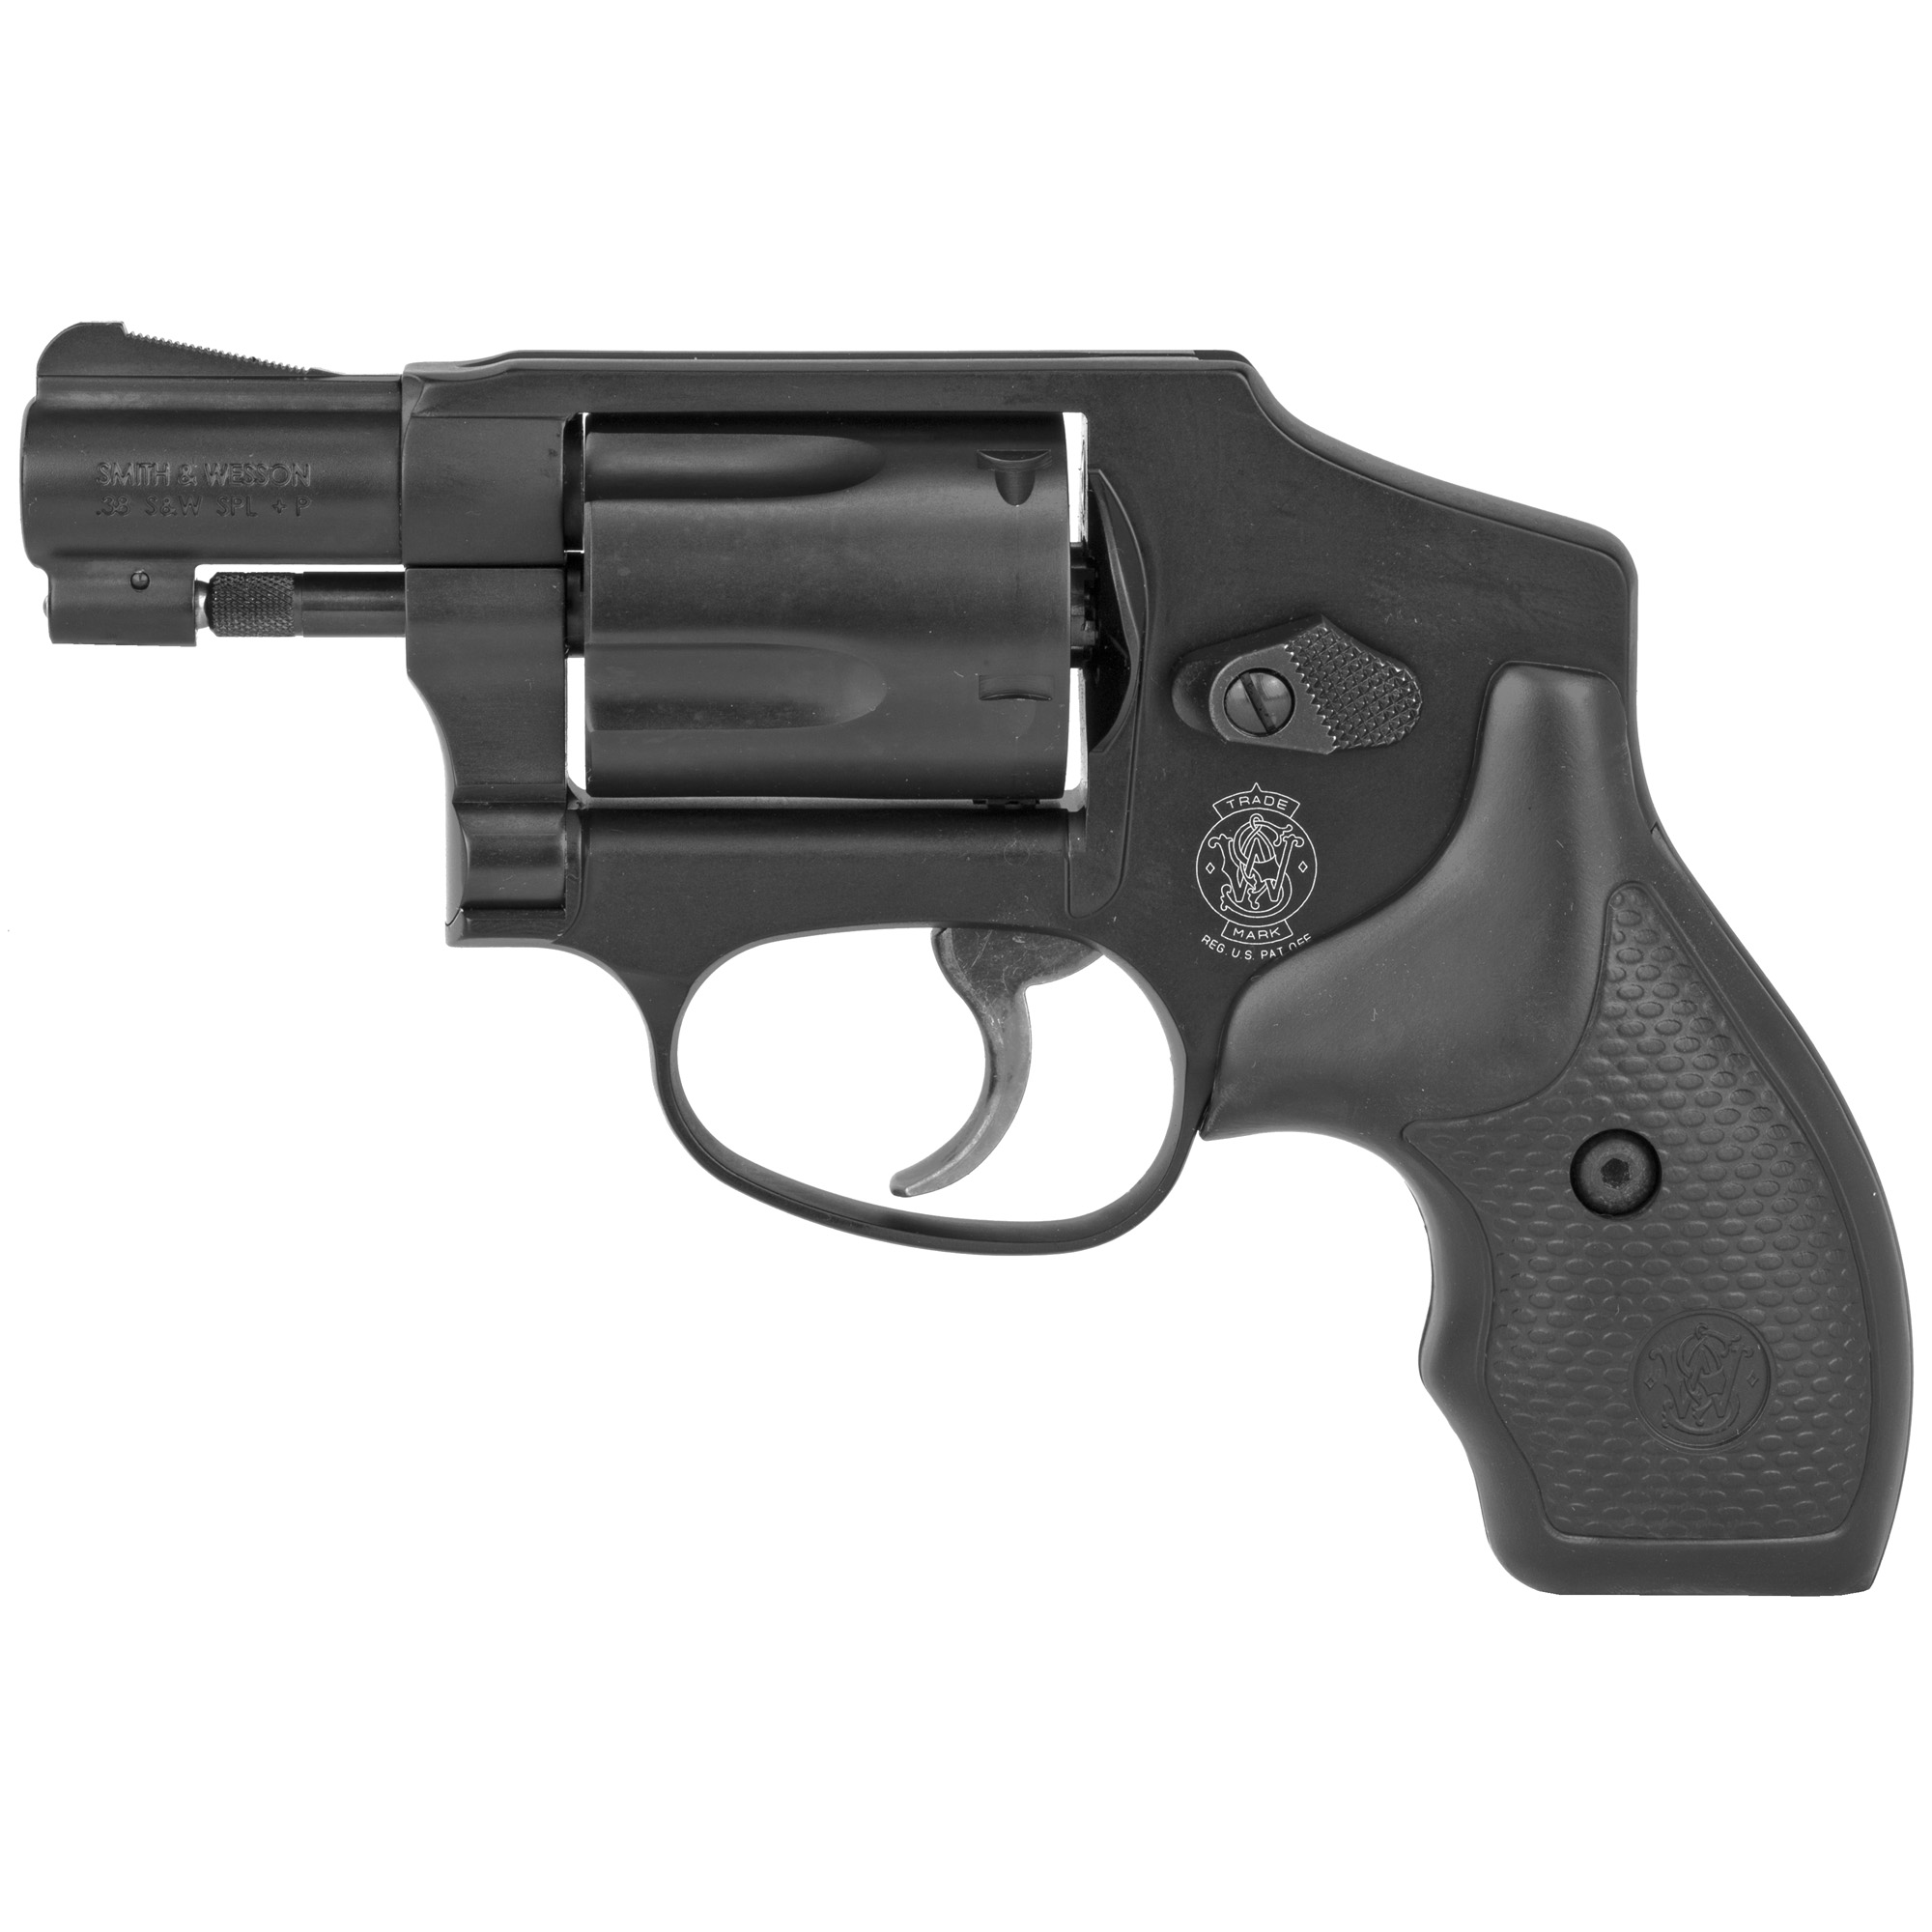 Smith & Wesson, Model 442, Double Action Only, Metal Frame Revolver, J-Frame, 38 Special, 1.875" Barrel, Alloy, Black, Rubber Grips, Integral Sights, 5 Rounds, No Internal Lock